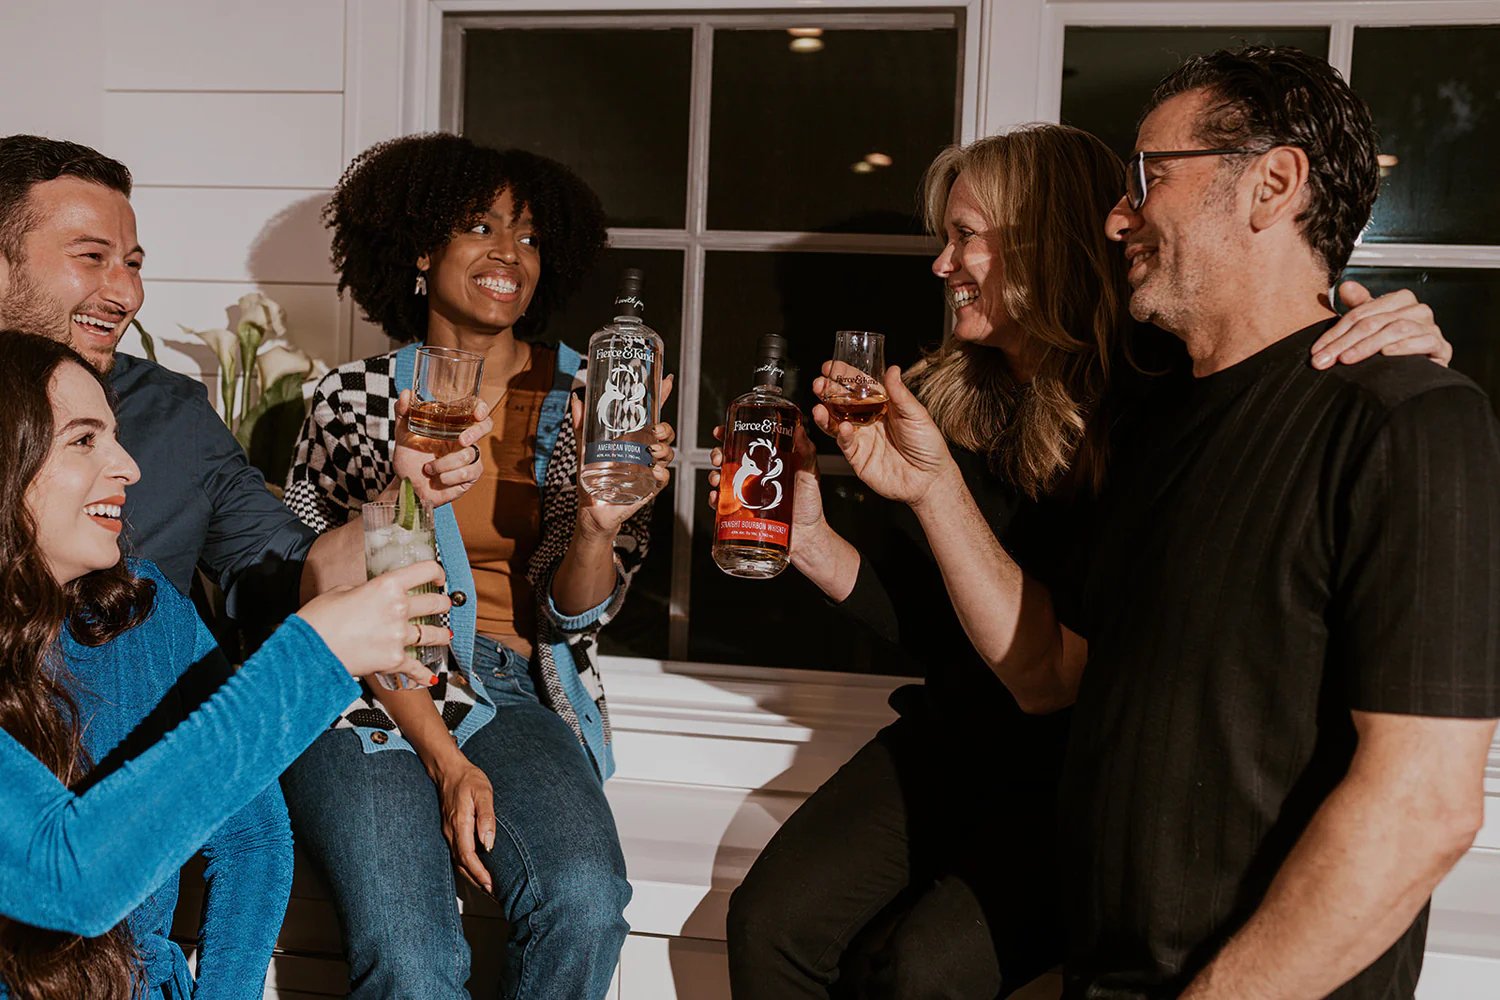 Founders of San Diego company Fierce & Kind Spirits, Cyndi Smith and Basem Harb, sharing a drink of their bourbon and vodka with friends